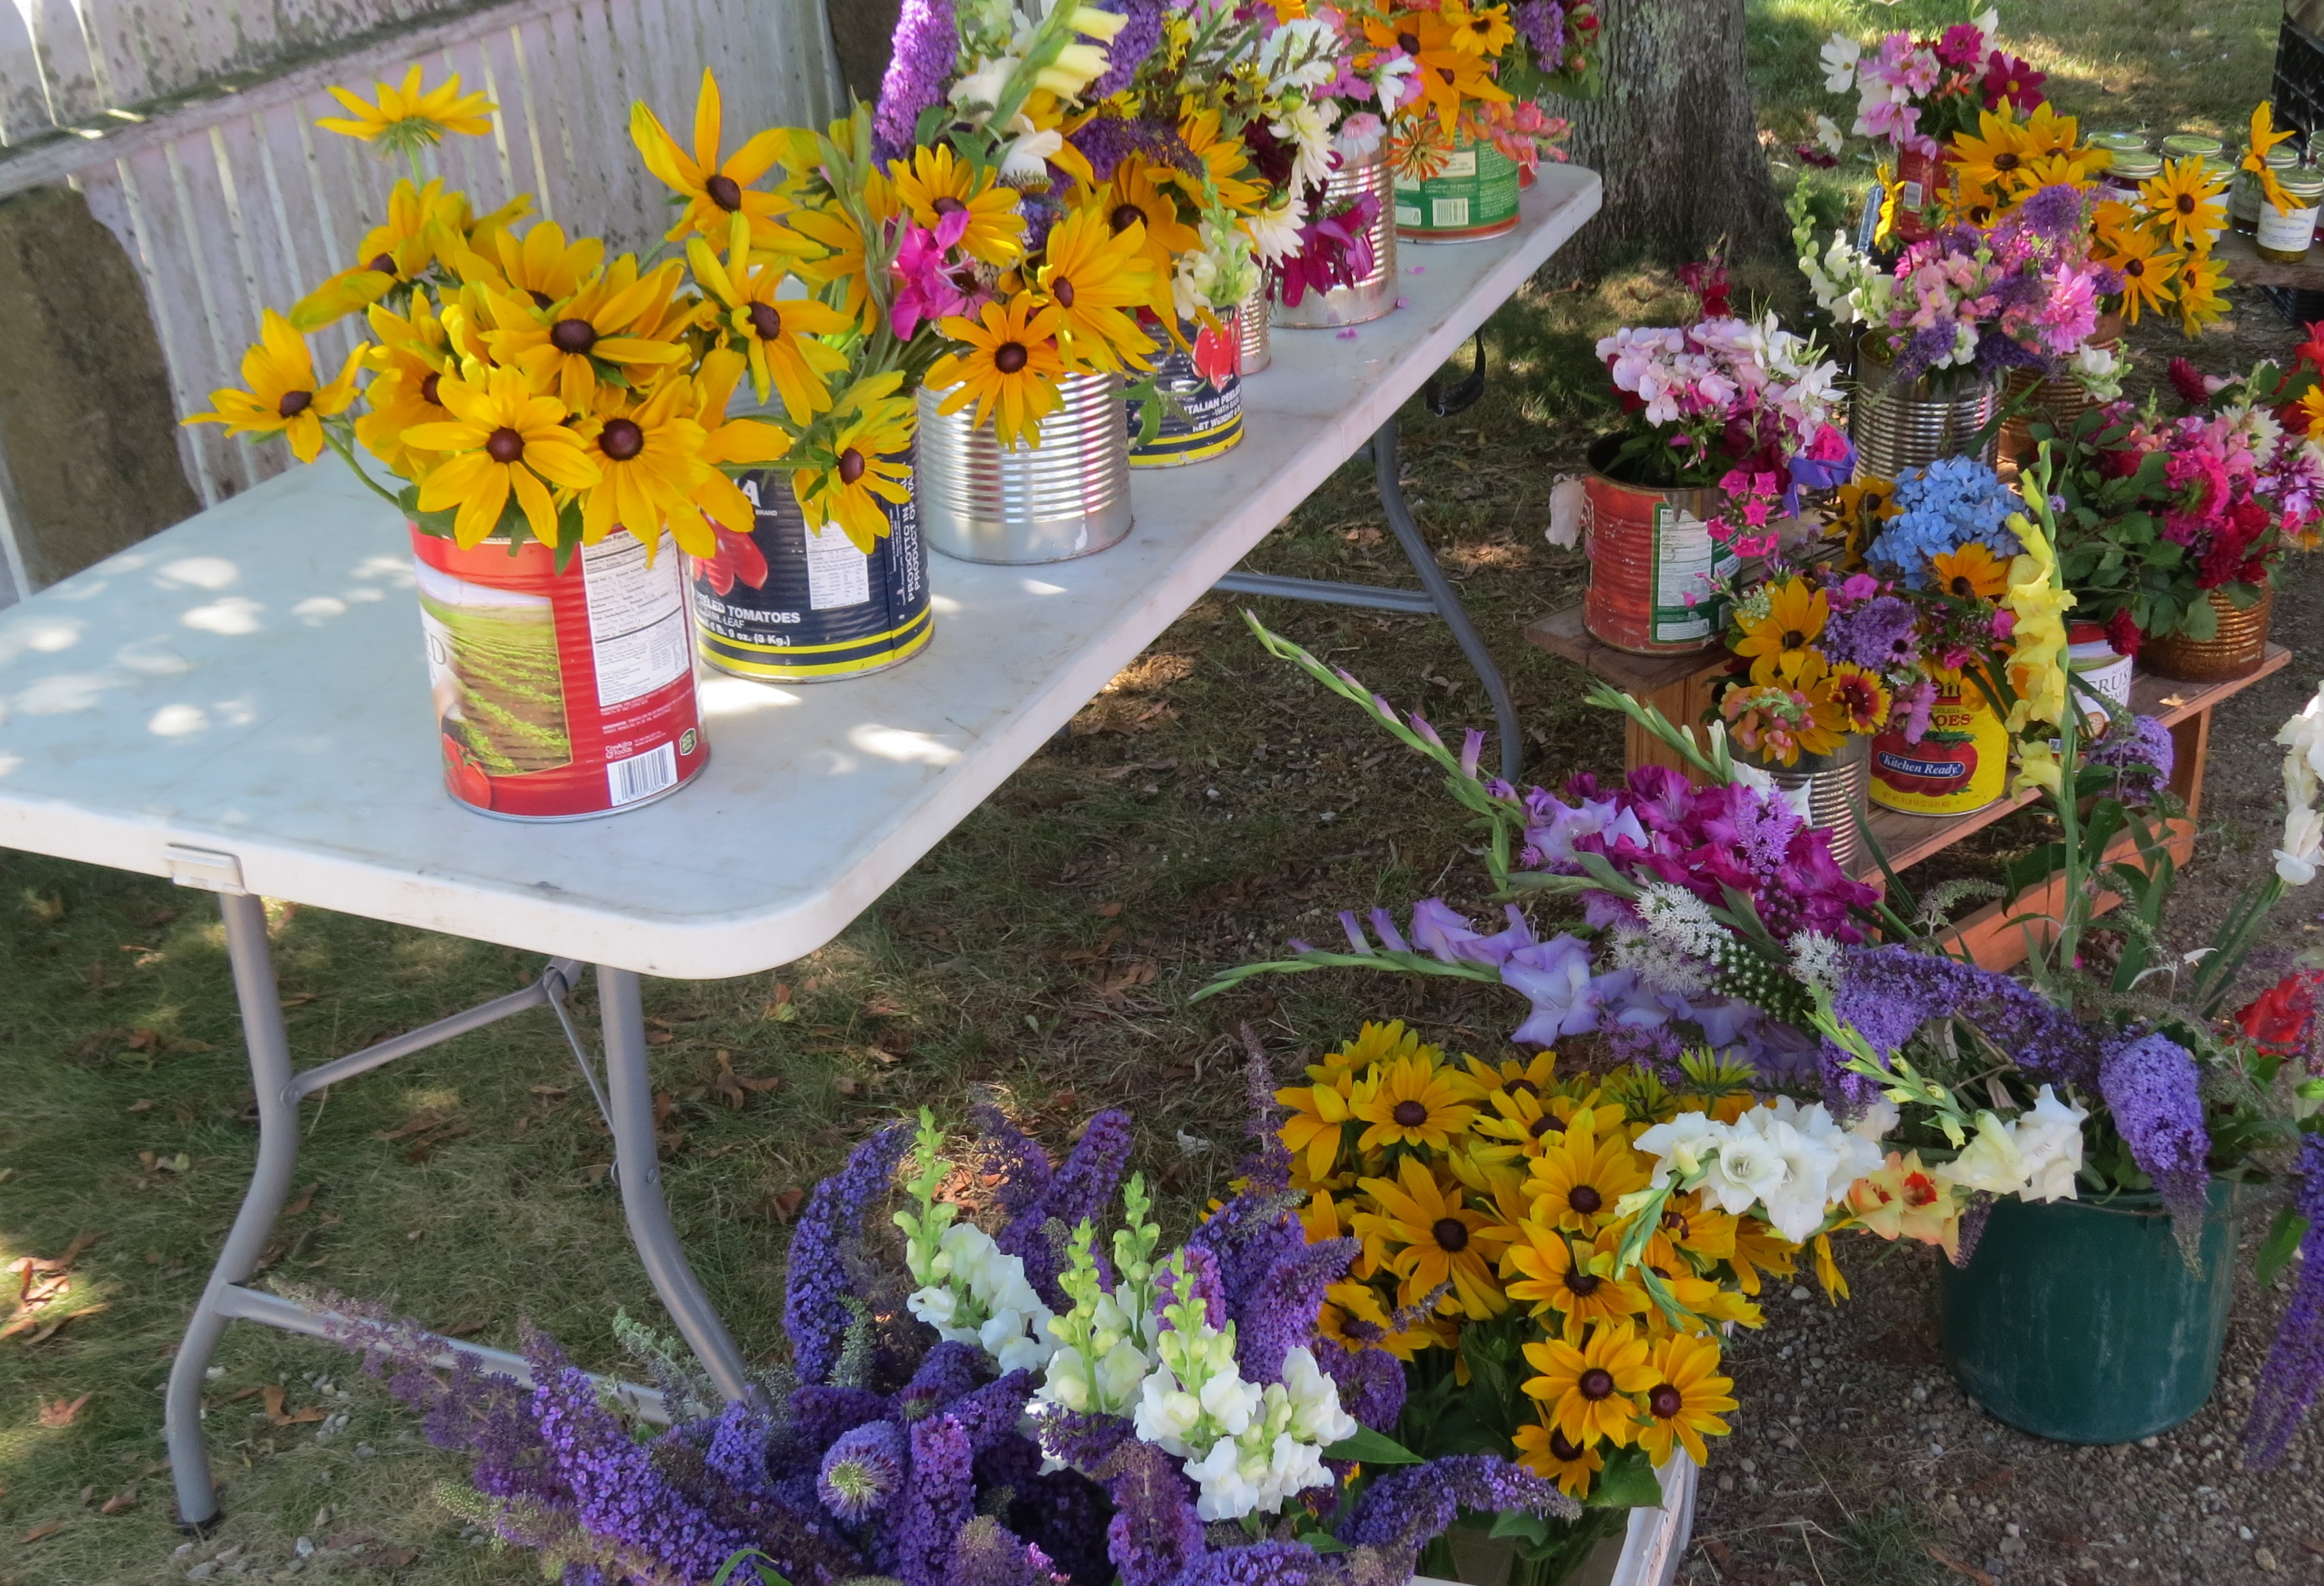 Flowers at the West Tisbury Farmers Market